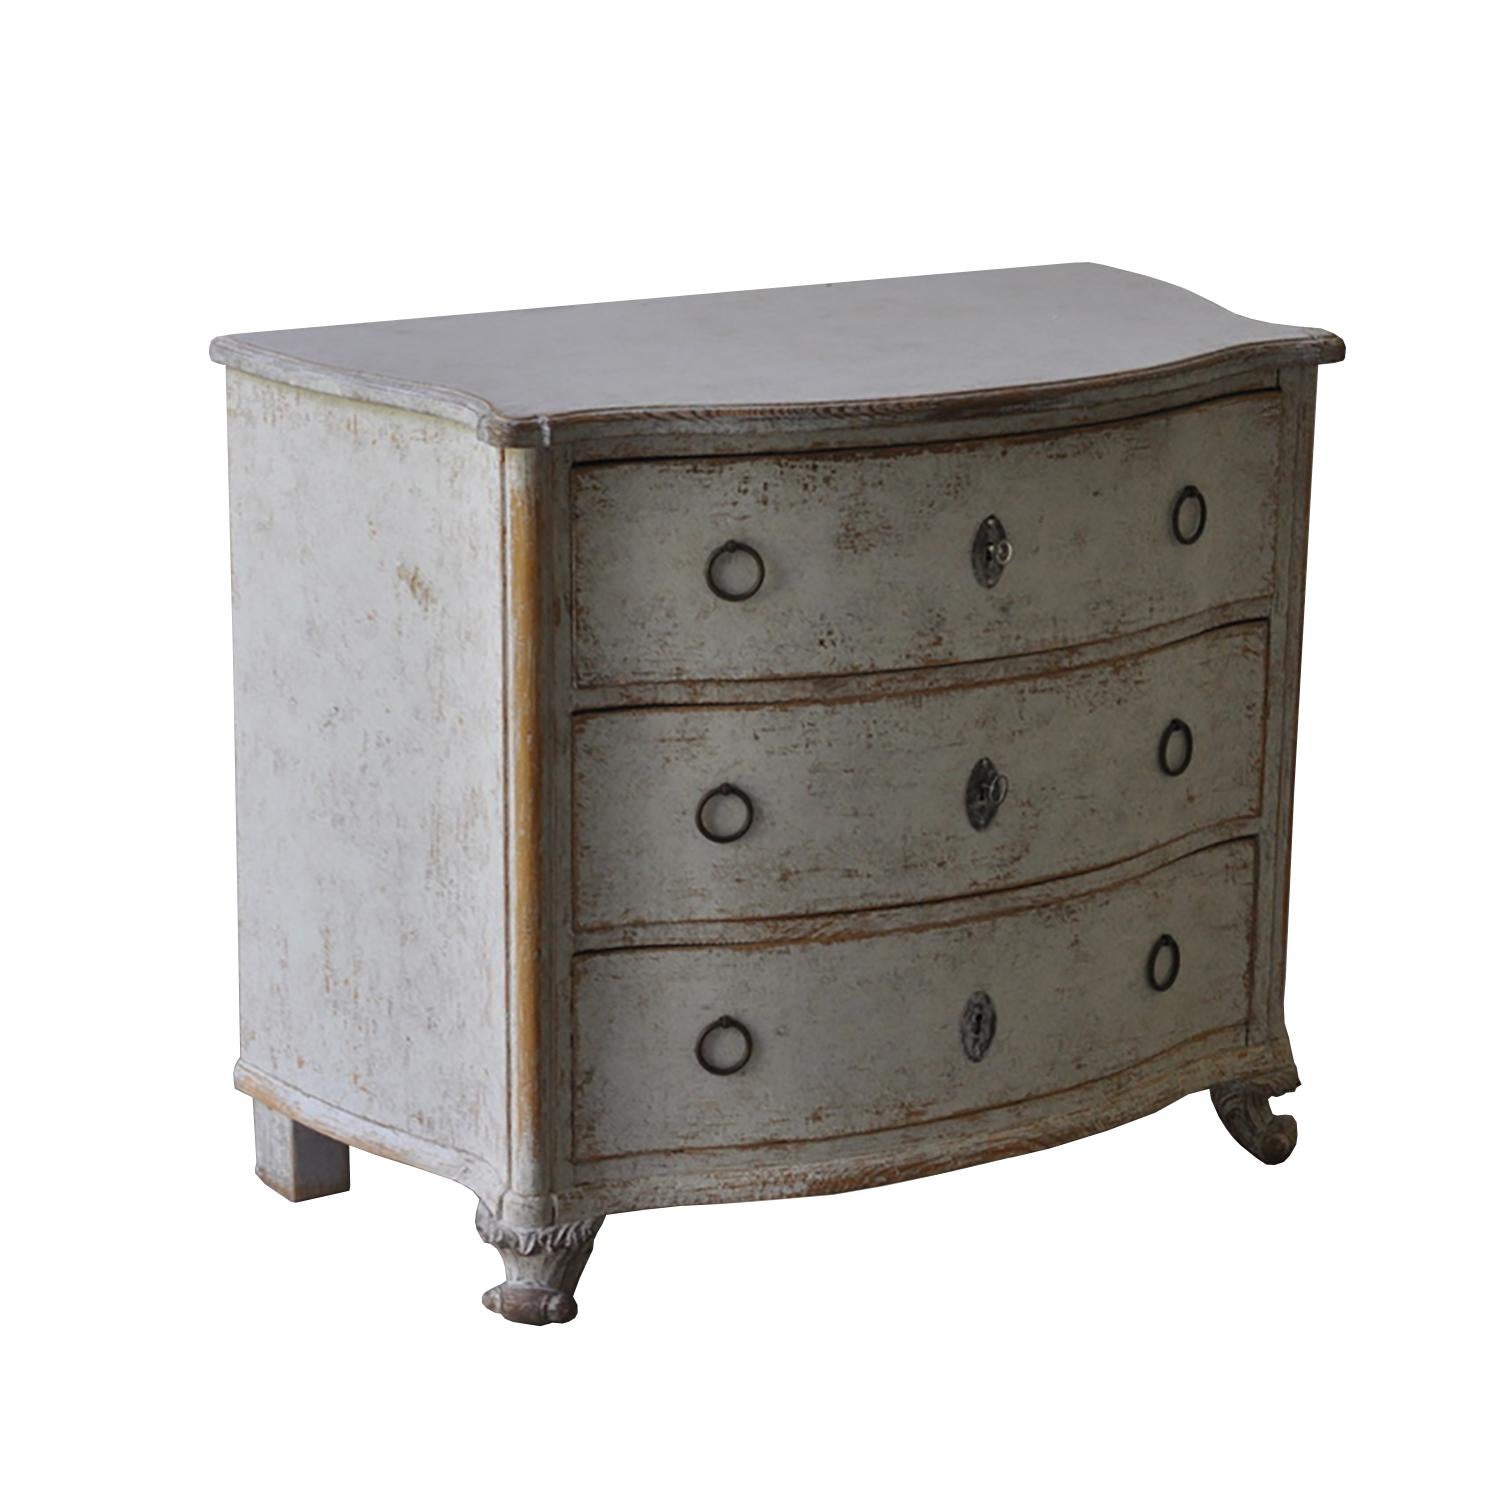 This 19th century bow front commode has three drawers with original hardware. It tapers to decorative carved feet.